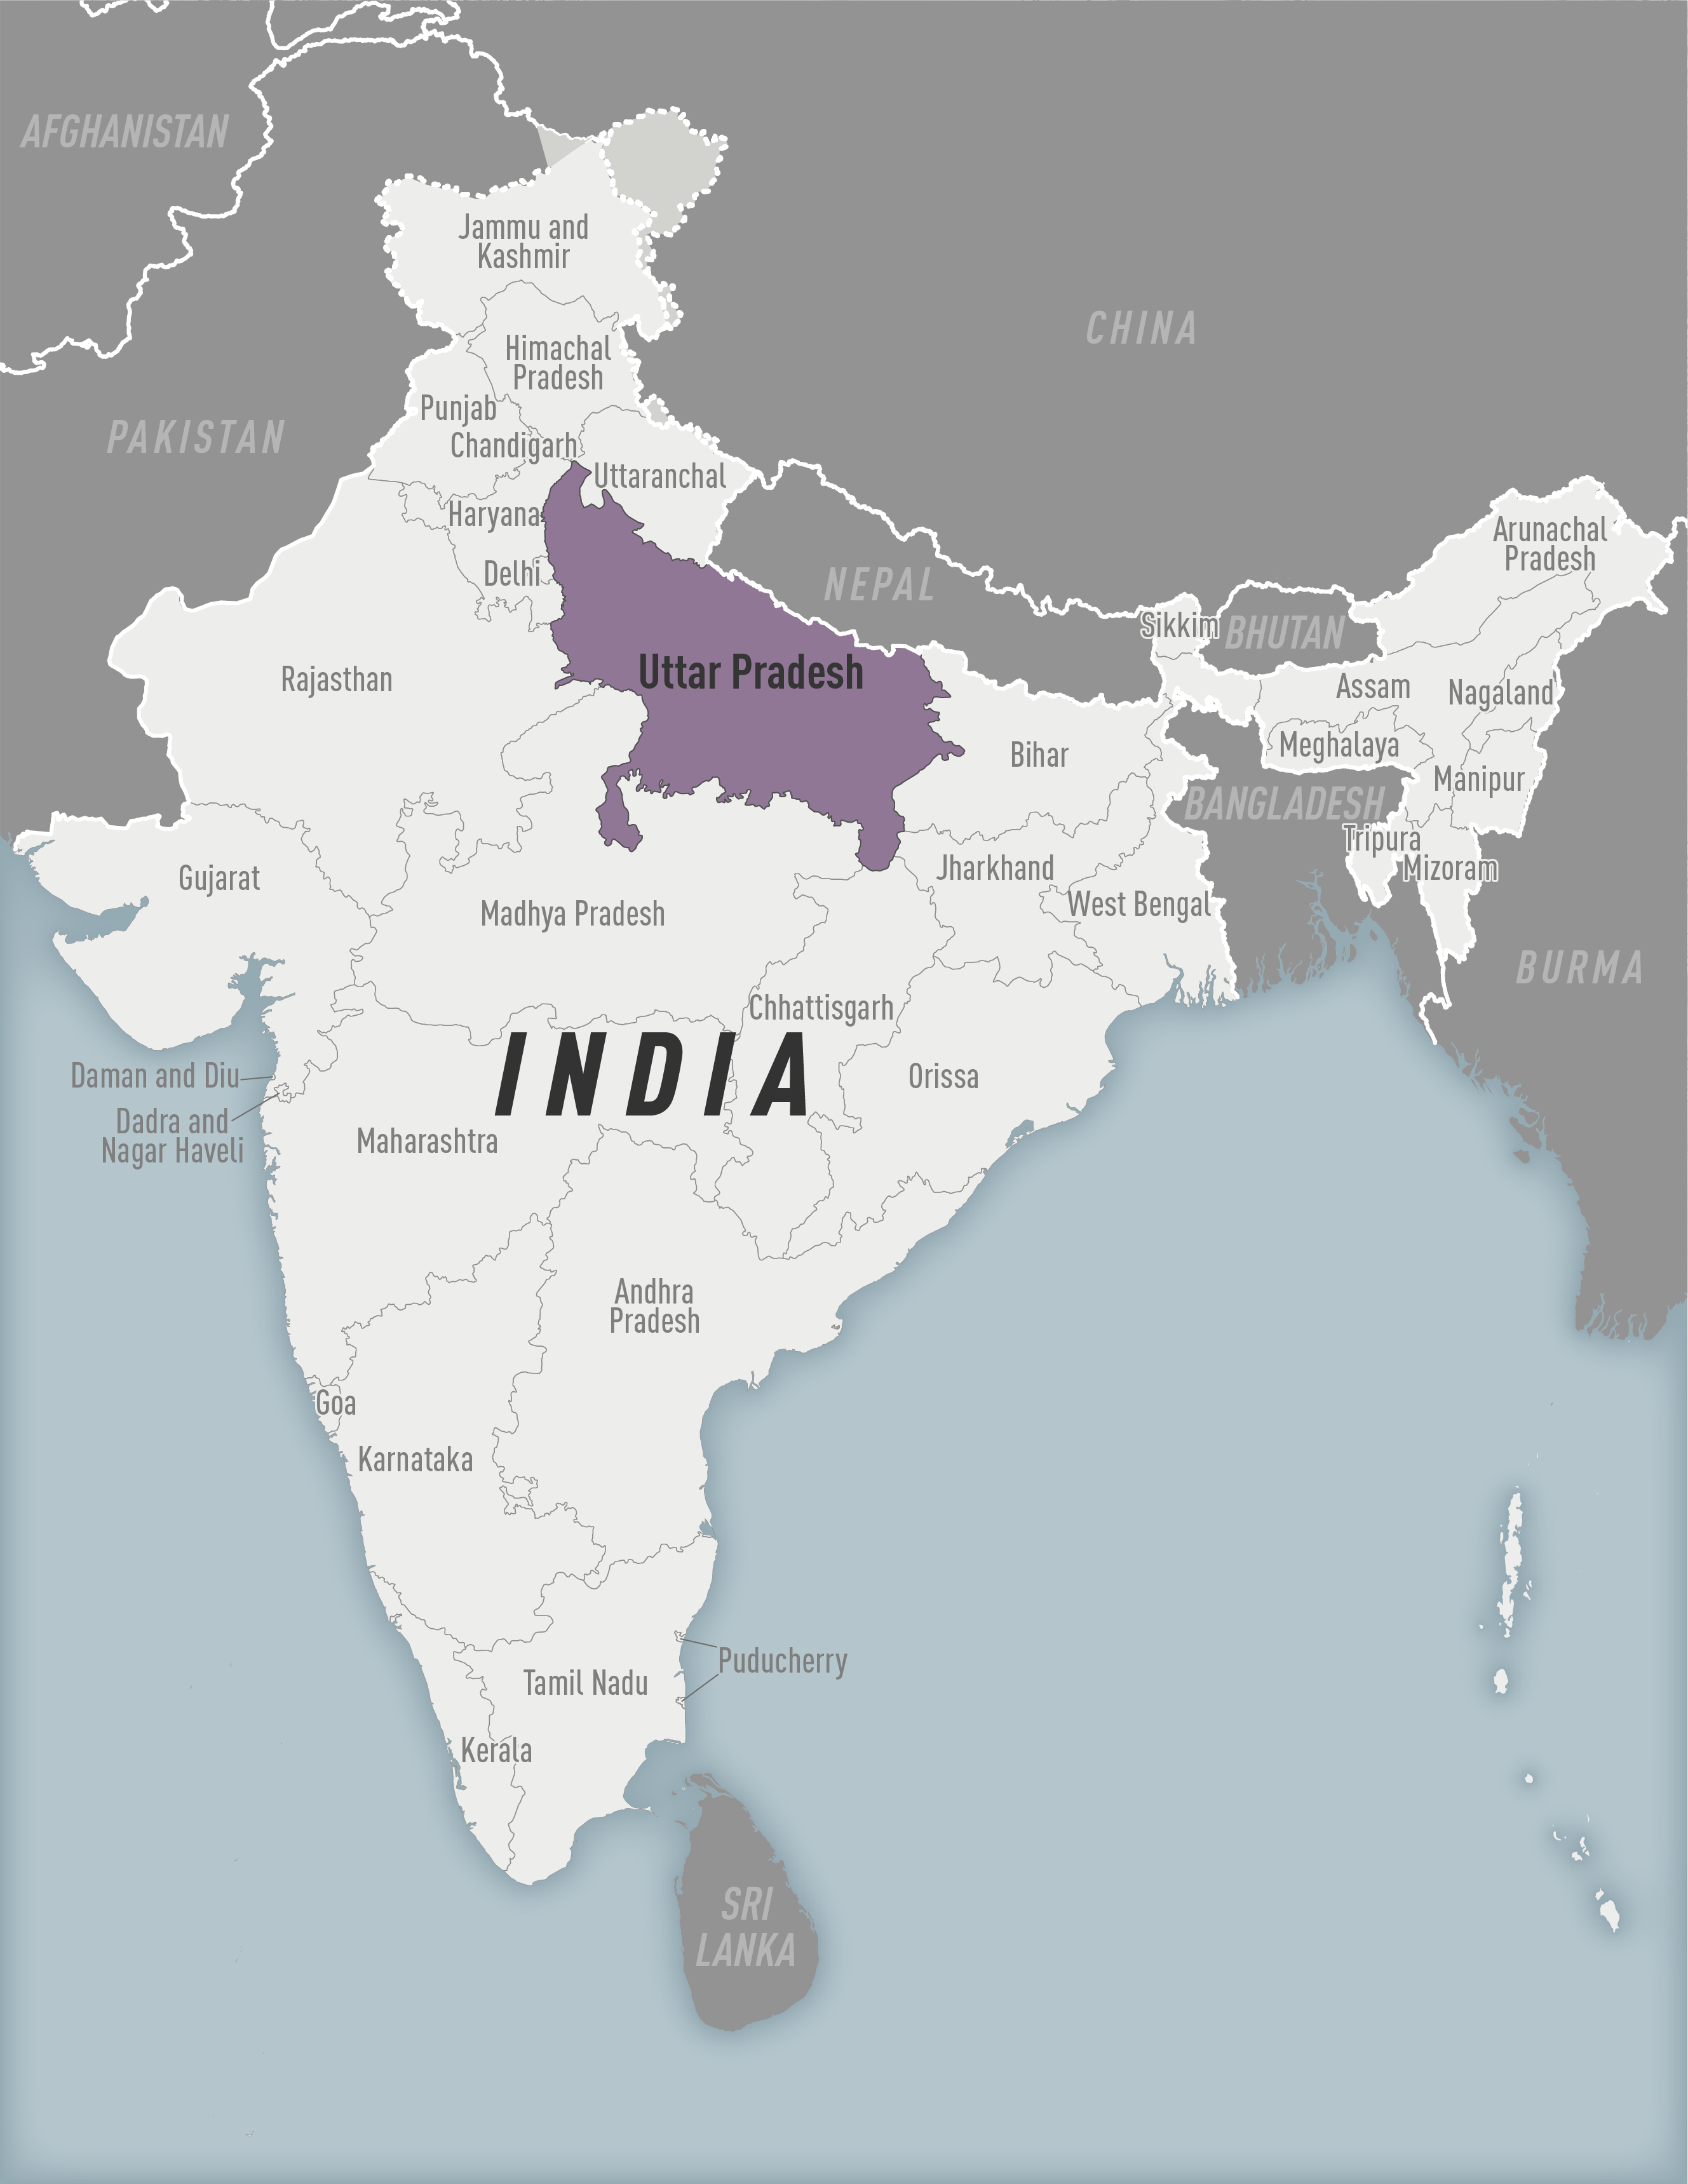 Area with Zika outbreak in India